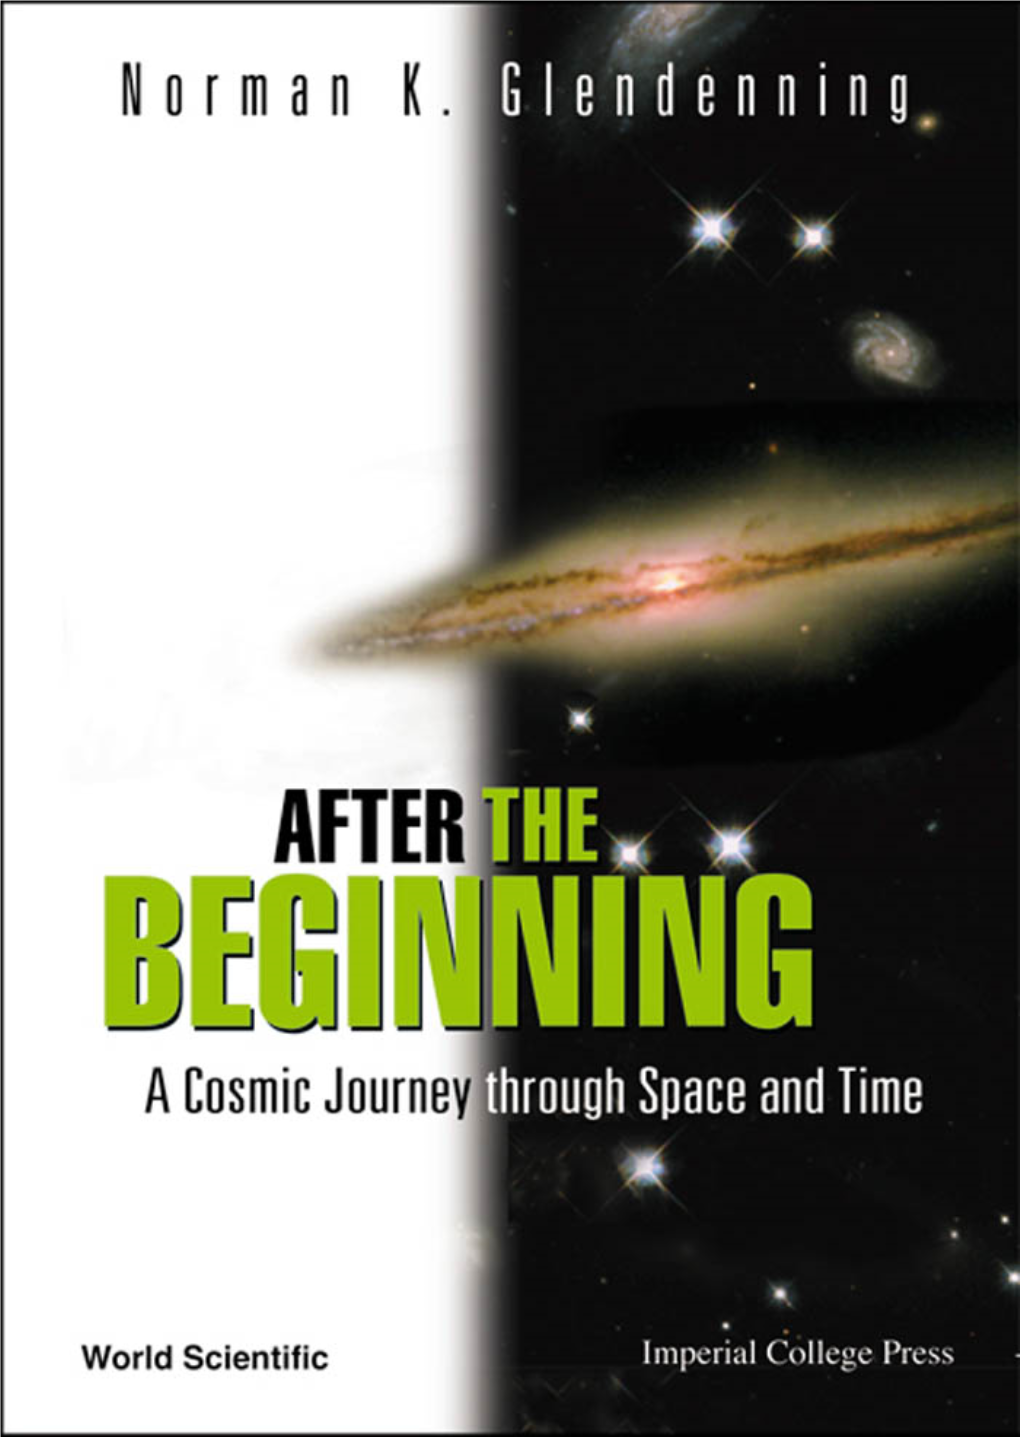 AFTER the BEGINNING: a COSMIC JOURNEY THROUGH SPACE and TIME Copyright © 2004 by Imperial College Press and World Scientific Publishing Co